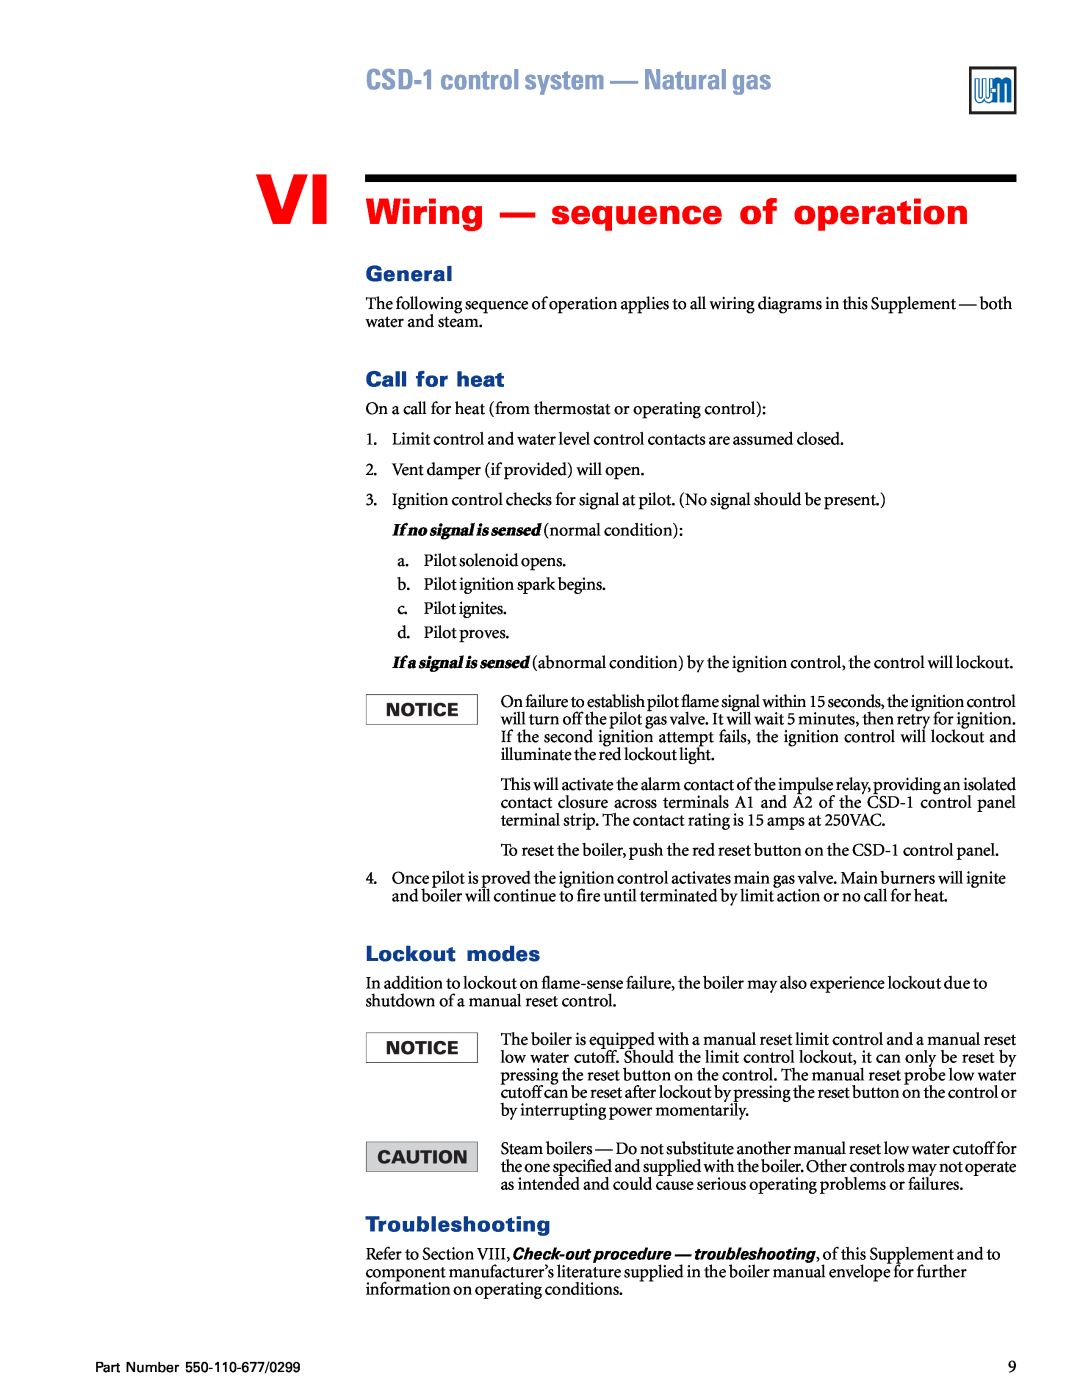 Weil-McLain EGH-125, EGH-105 VI Wiring - sequence of operation, Call for heat, Lockout modes, Troubleshooting, General 